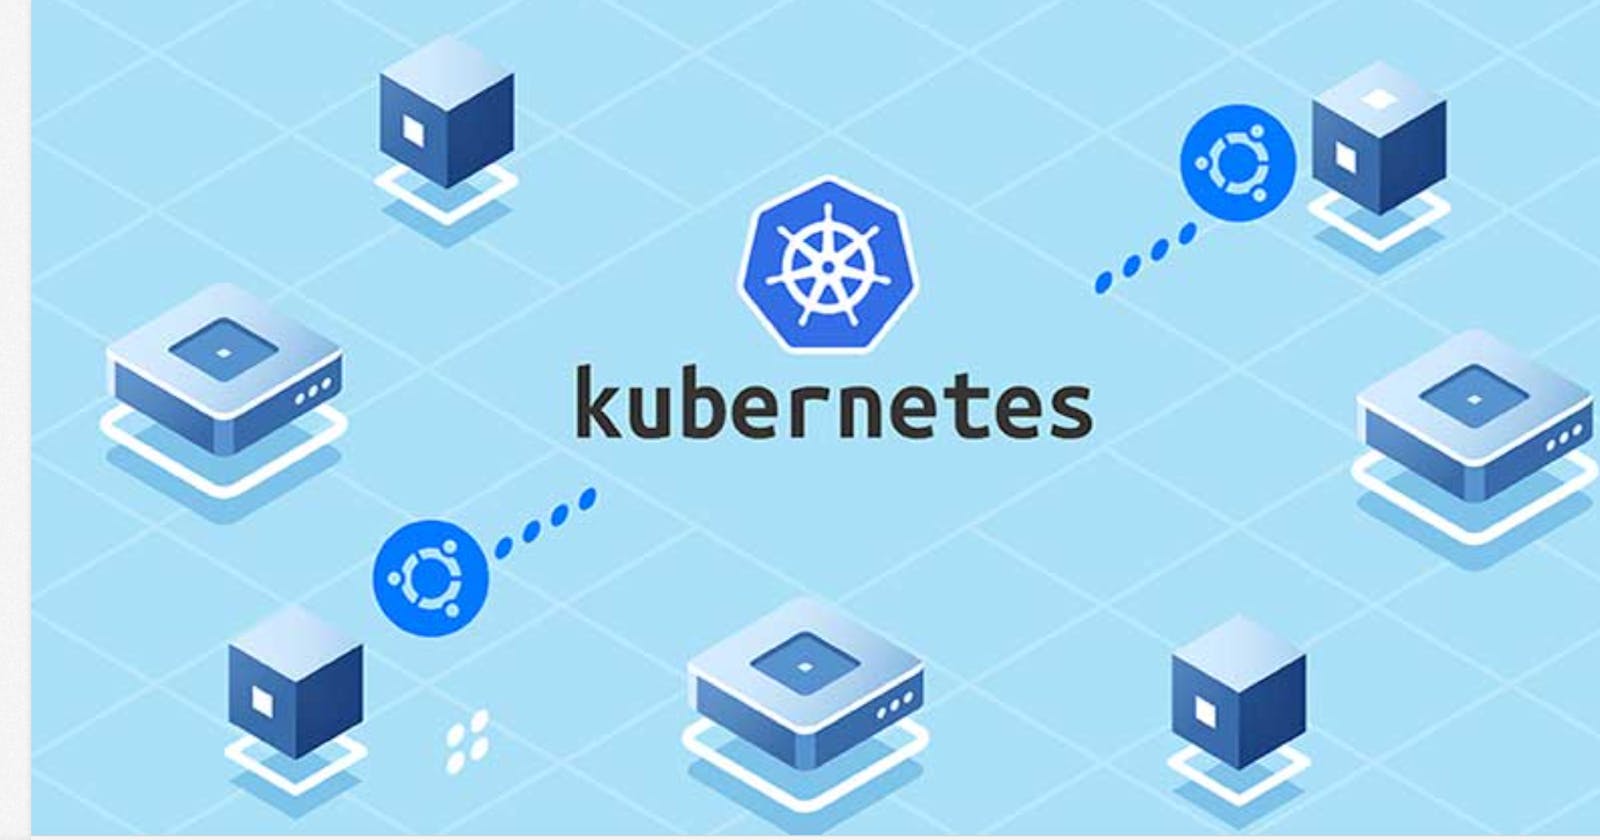 Tools to Manage your Kubernetes Cluster